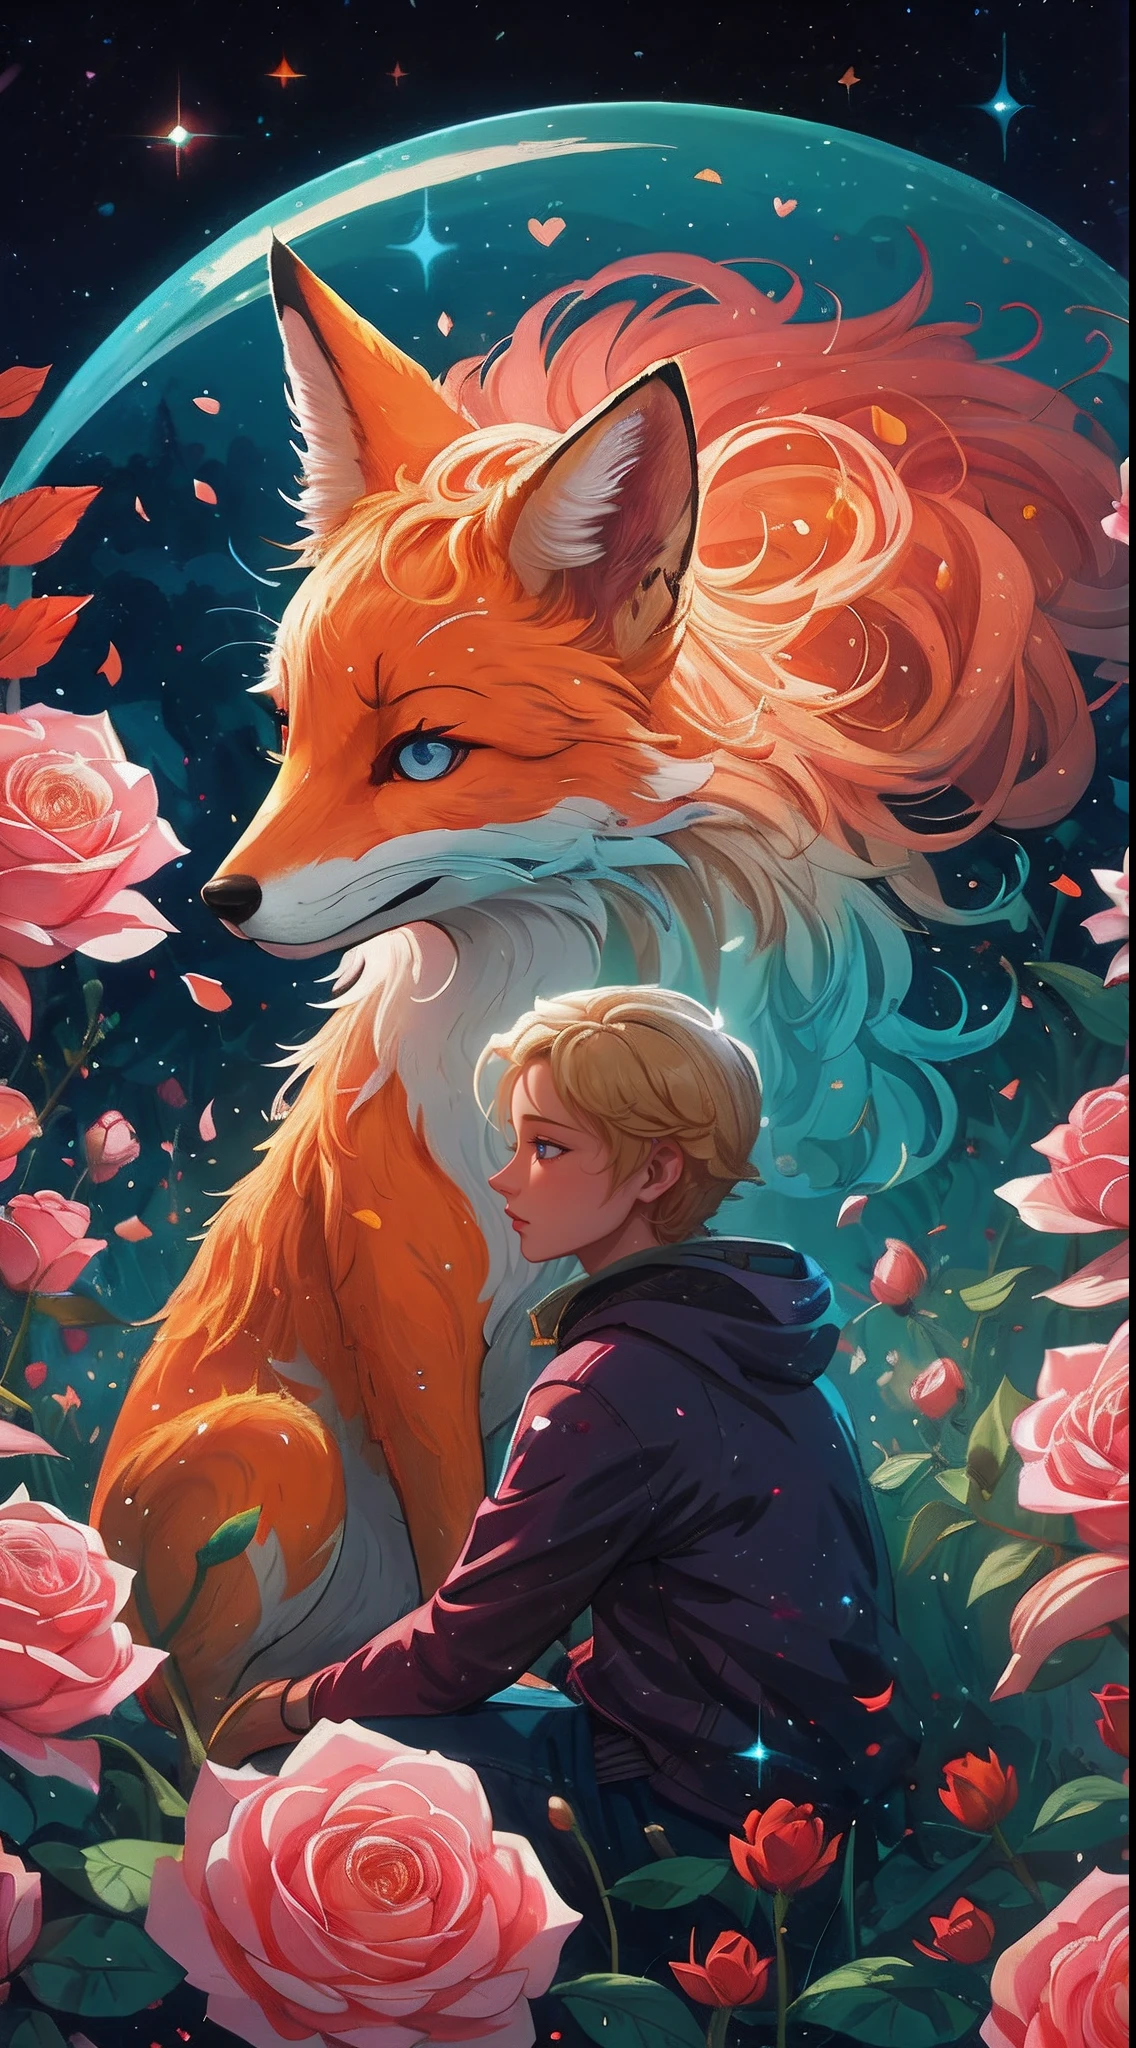 there is a little blonde boy that is sitting in the flowers with a fox, fantasy fox love, jen bartel, inspired by Cyril Rolando, beeple and jeremiah ketner, beautiful art uhd 4 k, in style of cyril rolando, cyril rolando and goro fujita, by Ryan Yee, exquisite digital illustration, ethereal fox